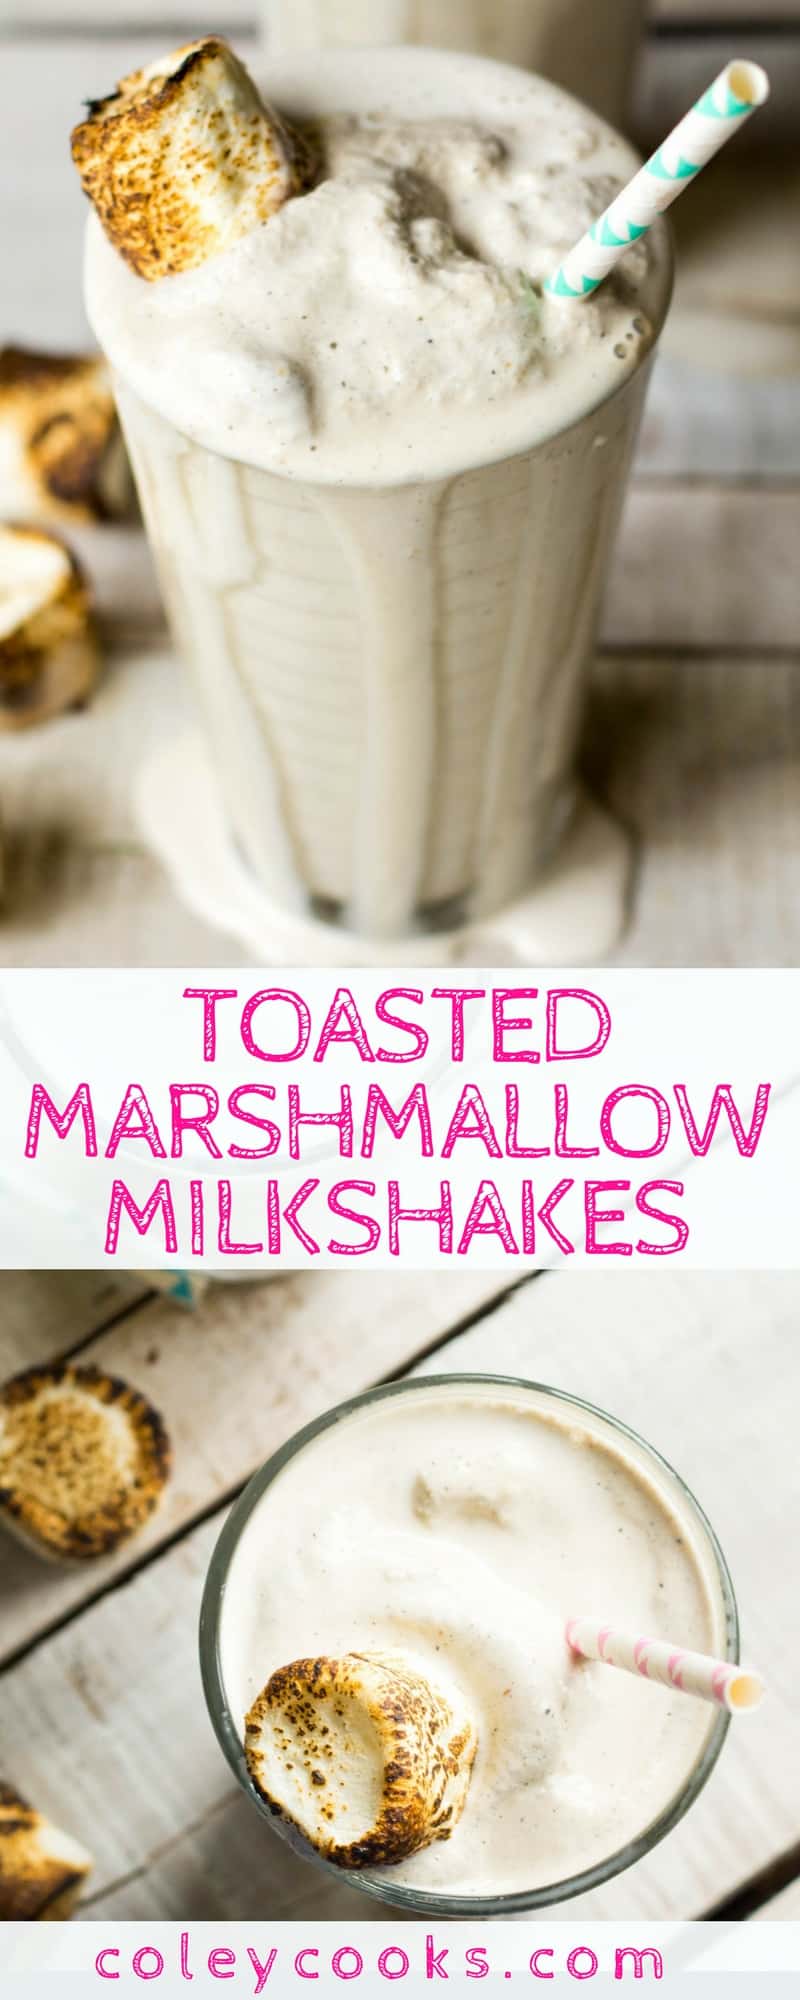 TOASTED MARSHMALLOW MILKSHAKES | Easy recipe for creamy toasted marshmallow milkshakes. So fun to make and only need 3 ingredients! #frozentreats | ColeyCooks.com